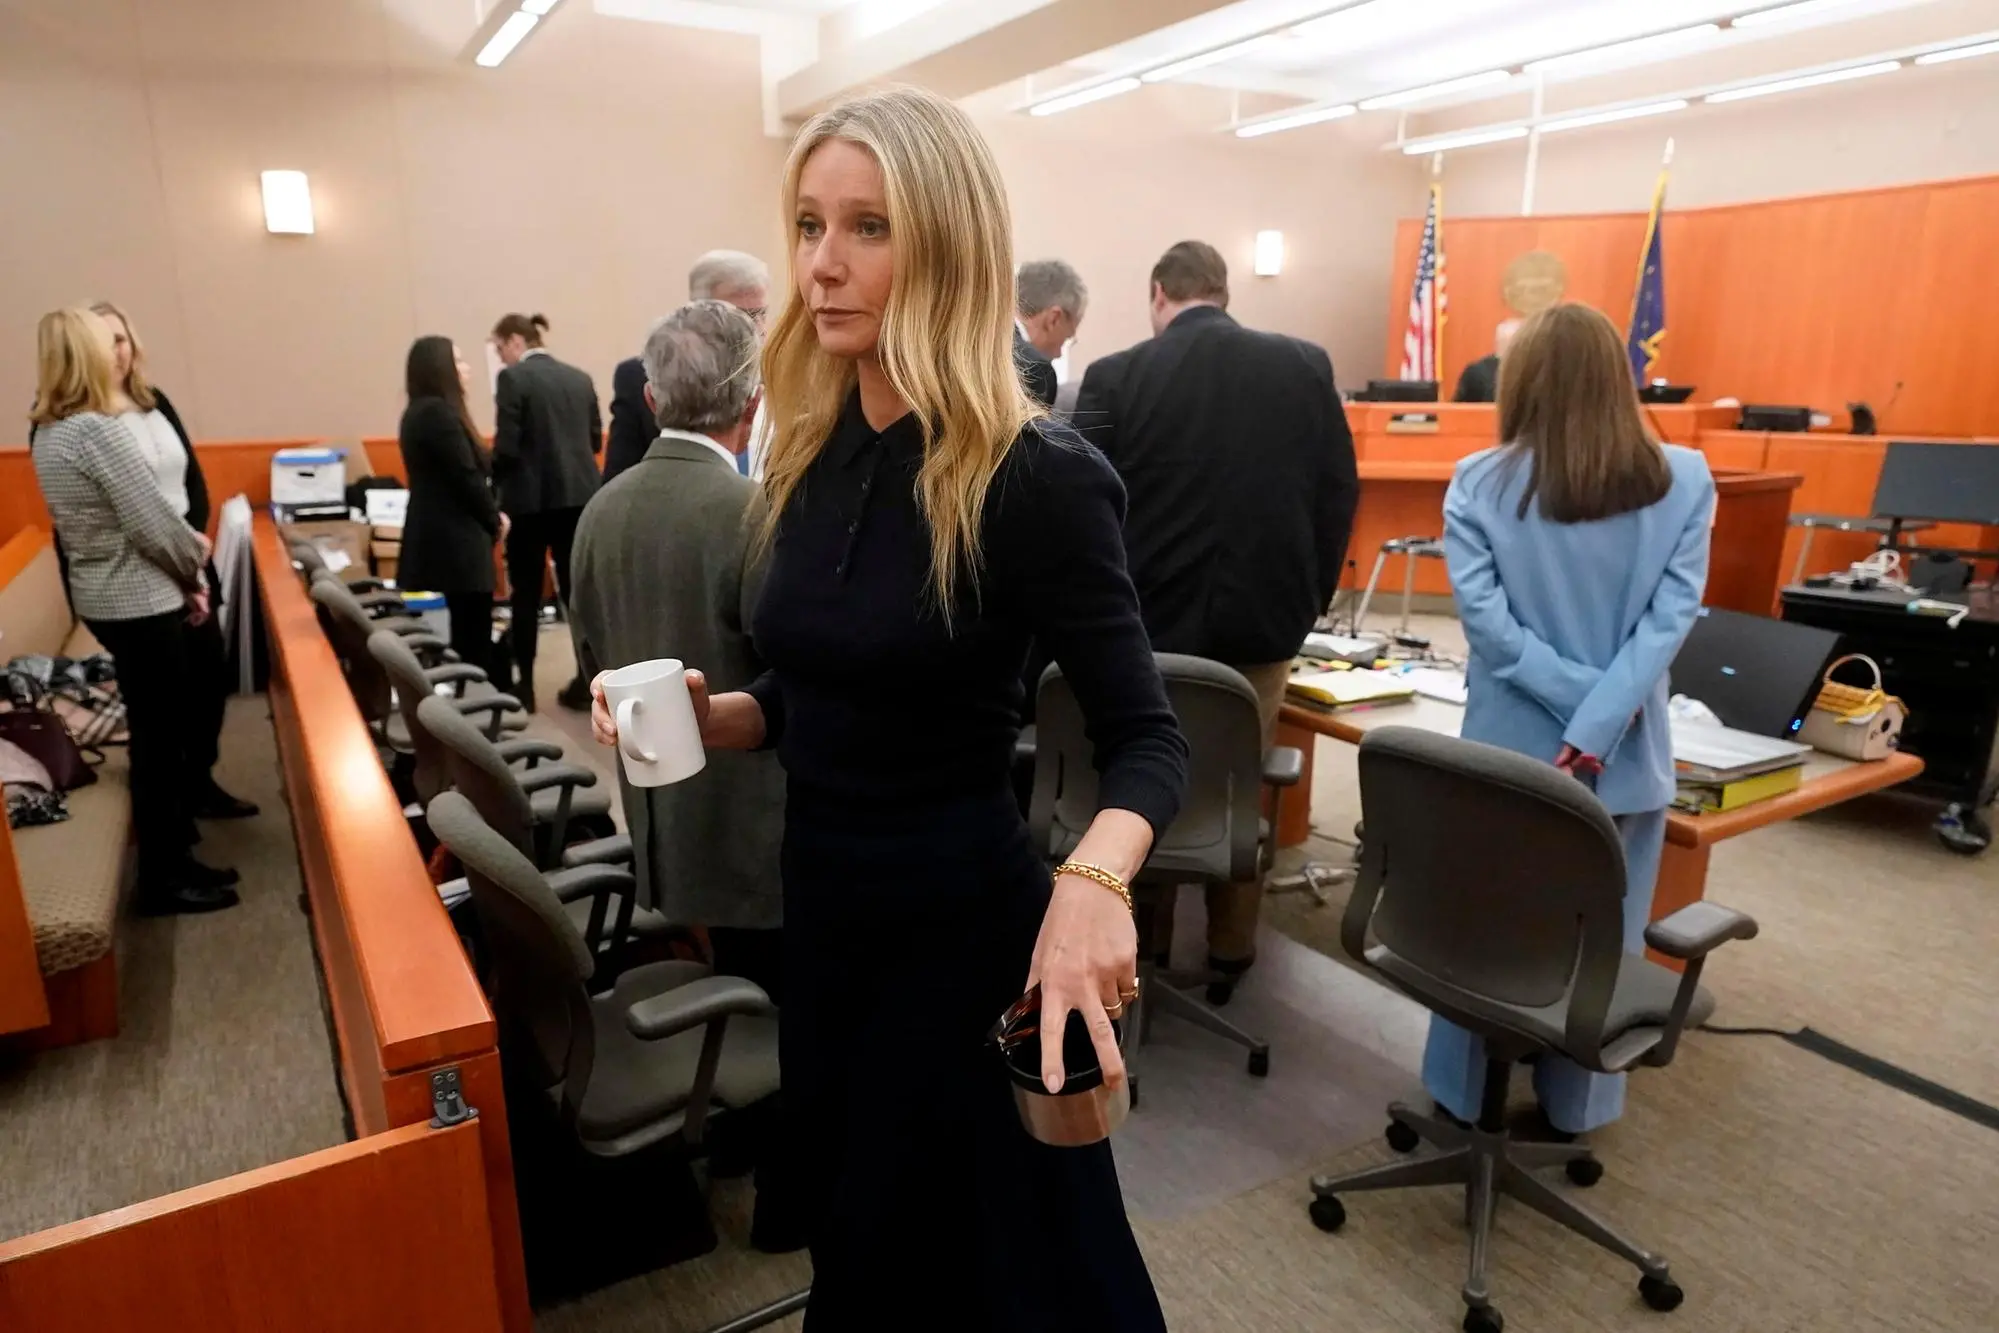 epa10541854 Gwyneth Paltrow exits the courtroom with a ceramic mug and metal cup after testifying about a 2016 ski collision that left a man with broken ribs and head trauma, in Park City, Utah, USA, 24 March 2023. EPA/Rick Bowmer / POOL